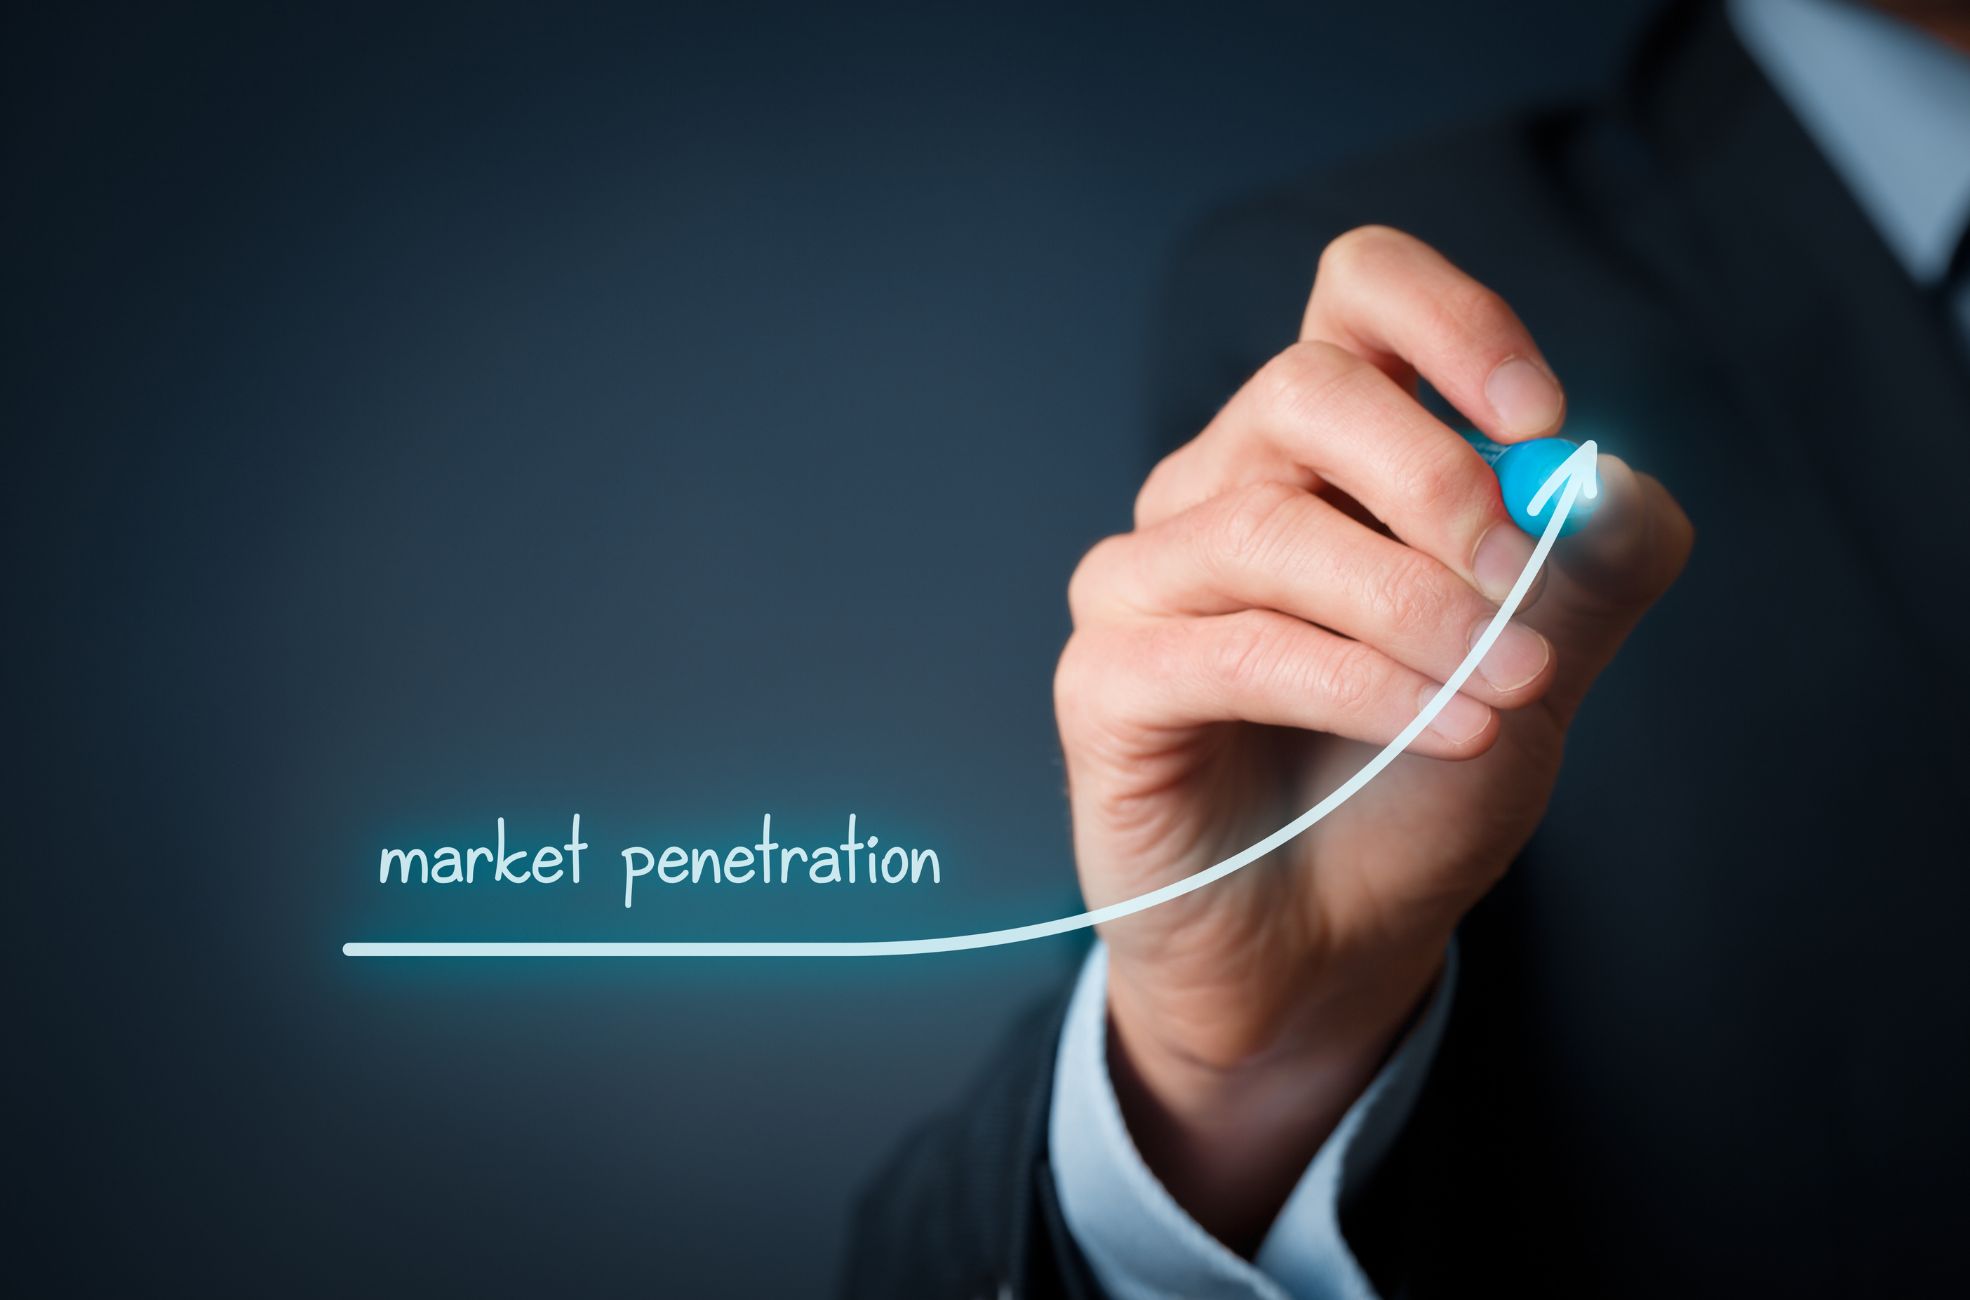 Stock Photo Man And Words "Market Penetration"